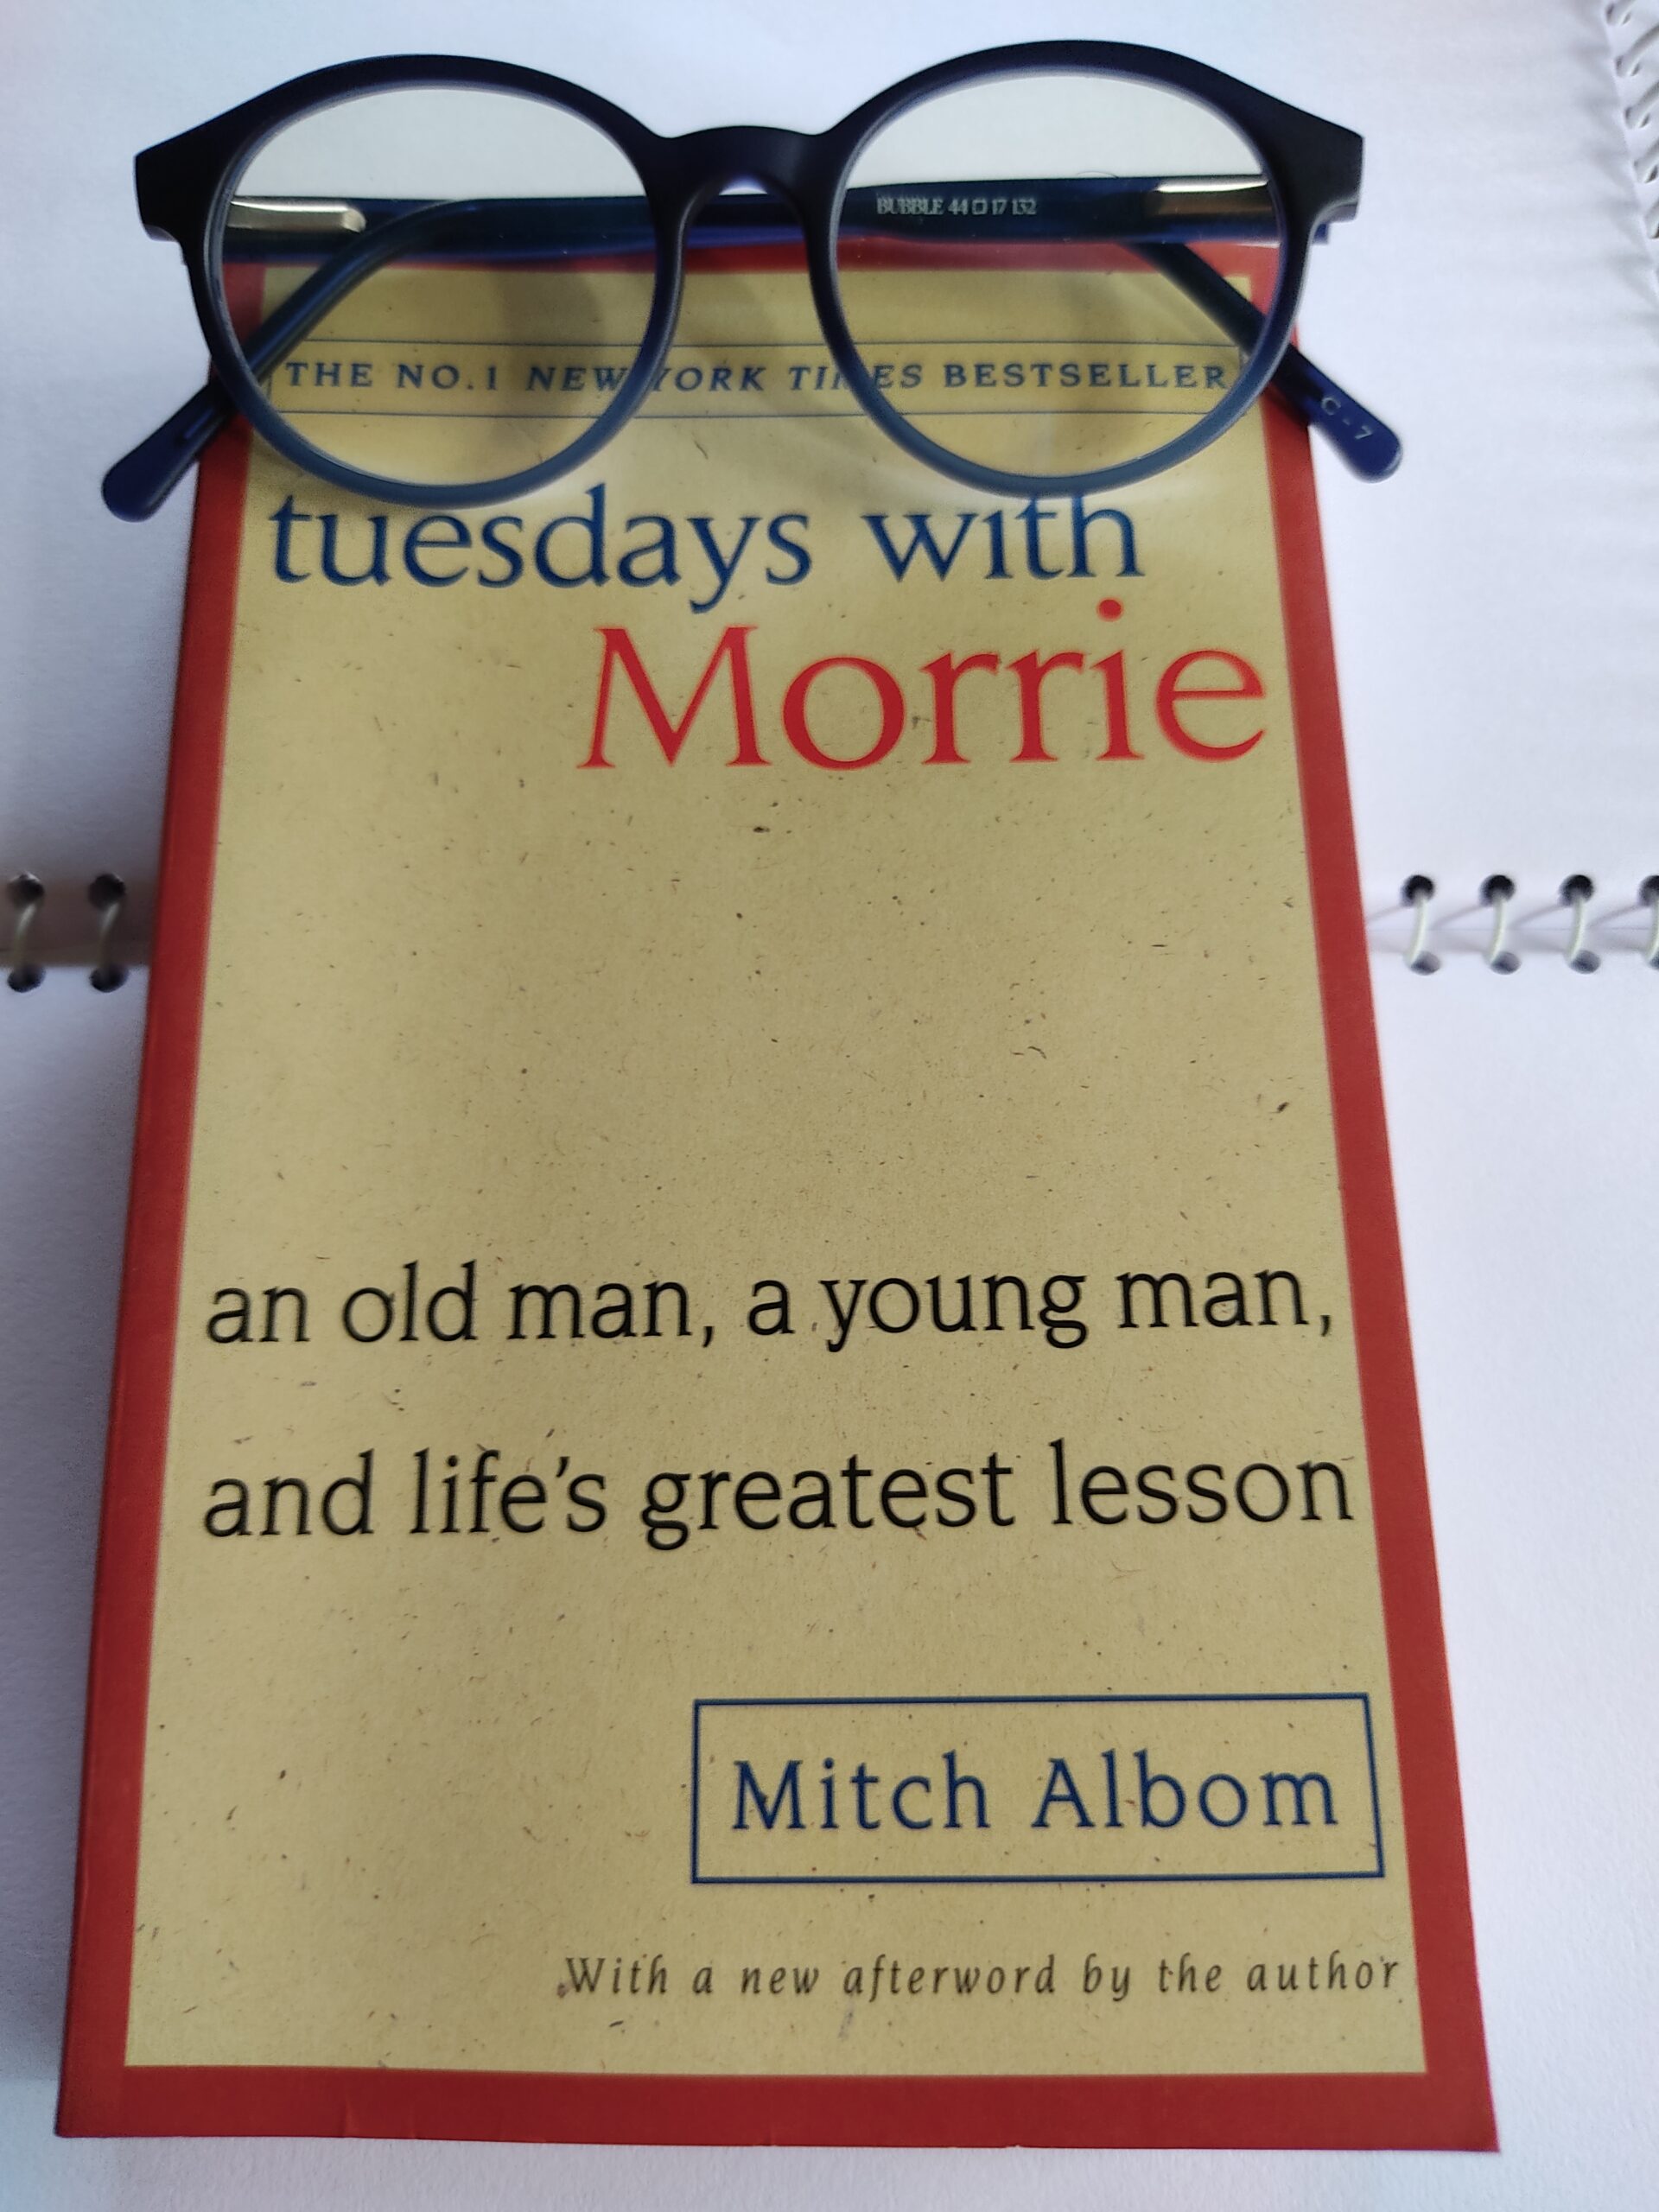 Tuesdays with Morrie, Mitch Albom